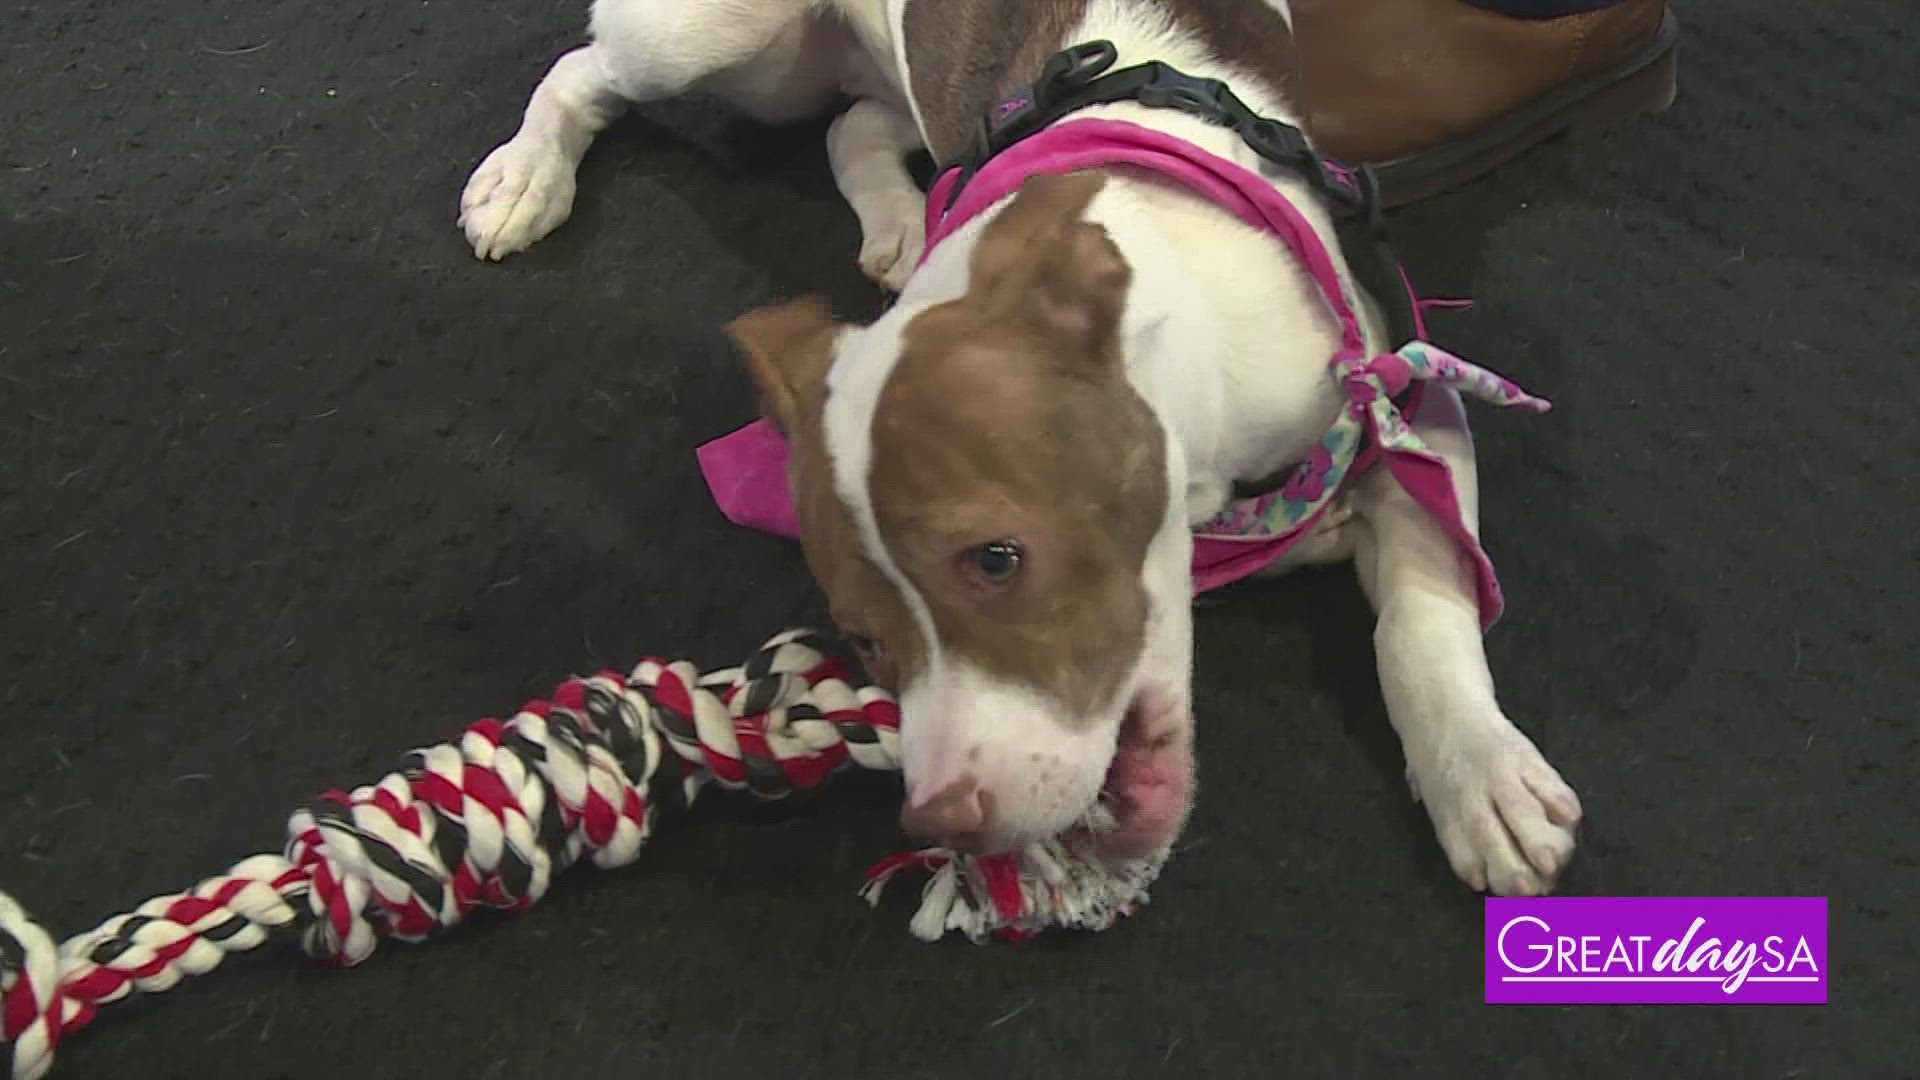 San Antonio Pets Alive stops by to tell us how you can get involved with being a foster for pets in need.